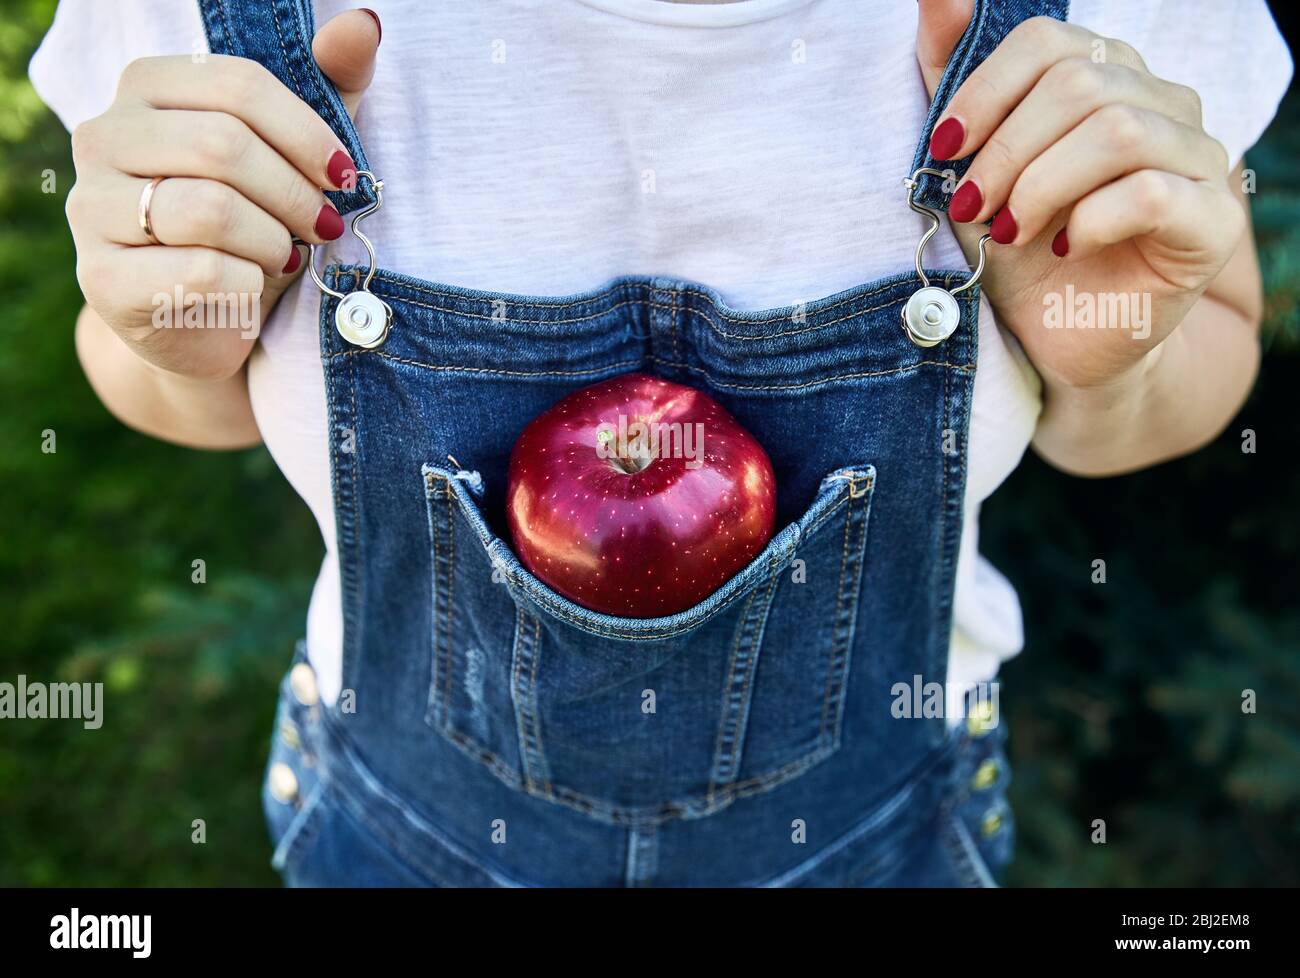 Jeans Overalls High Resolution Stock Photography and Images - Alamy